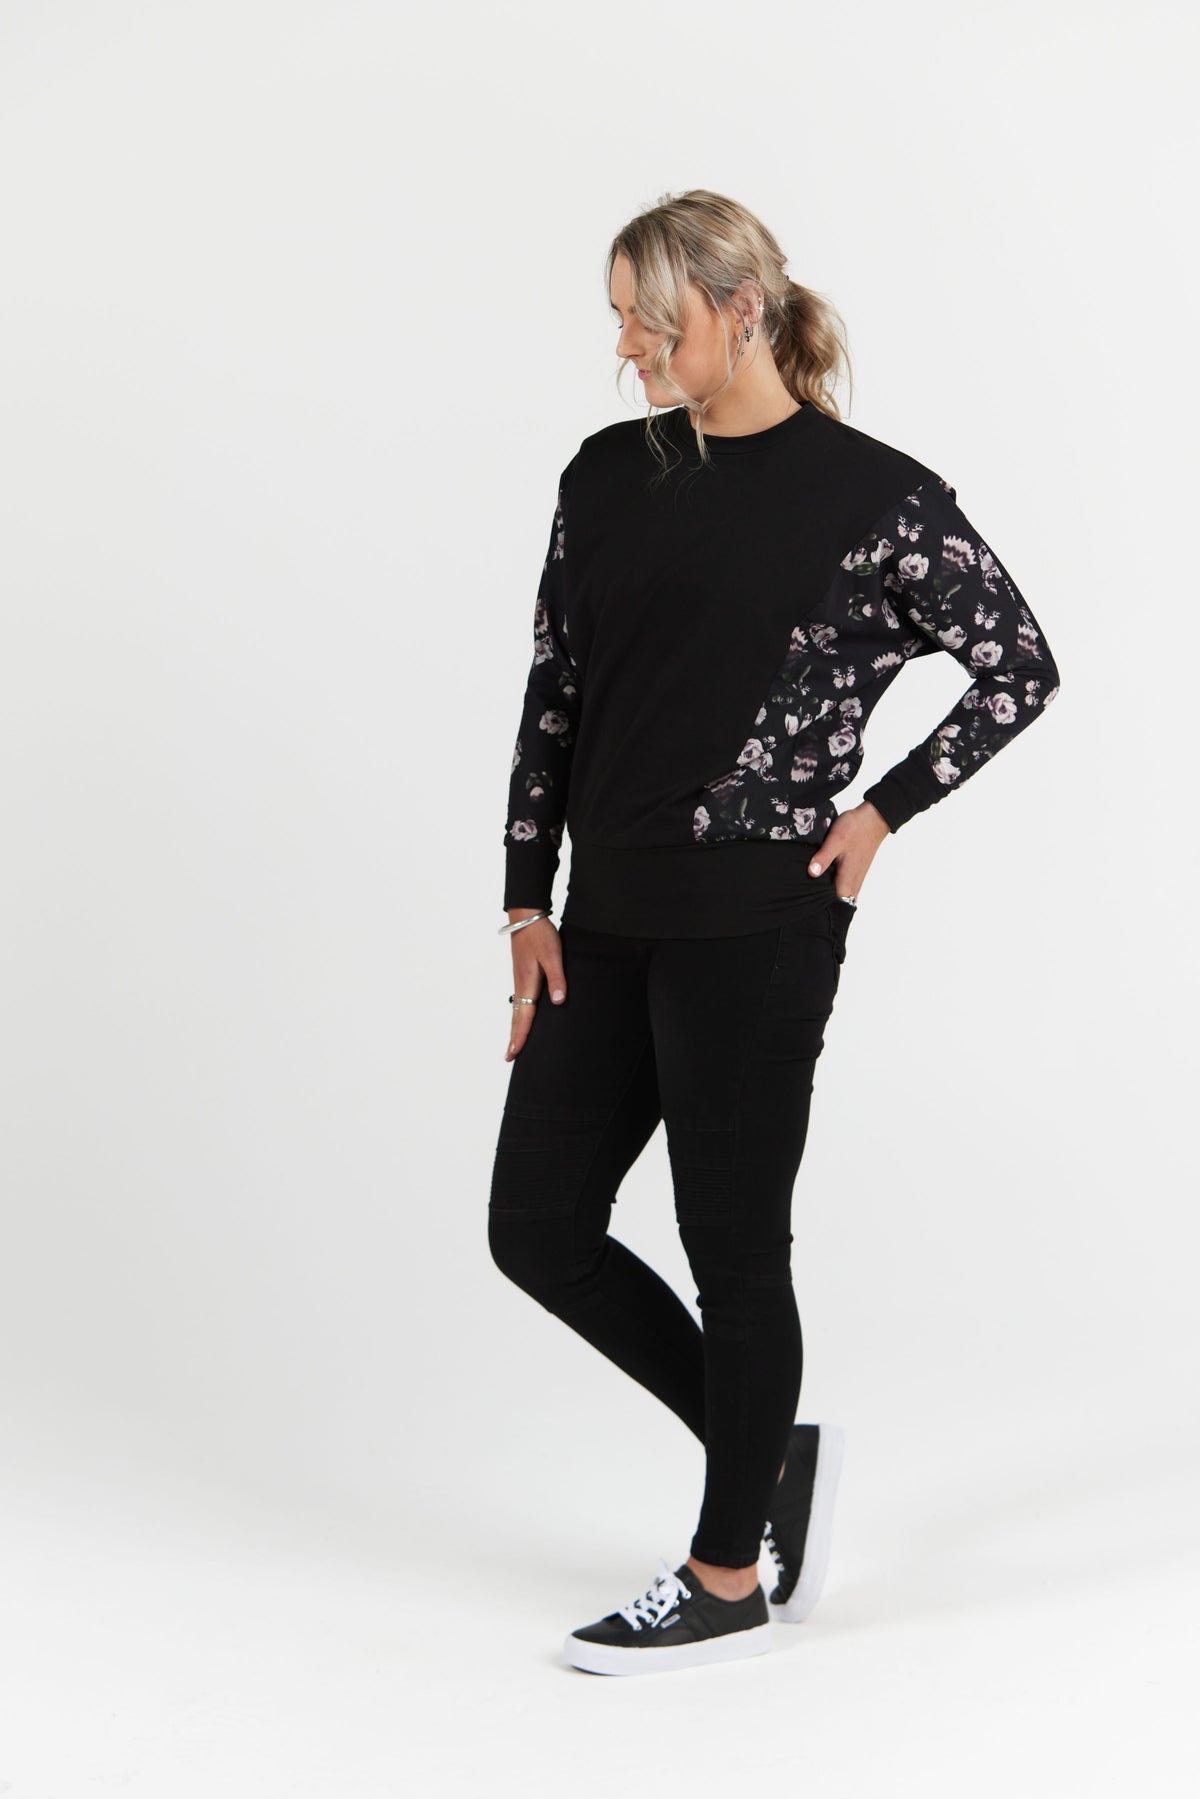 Ava Top Black With Black Floral